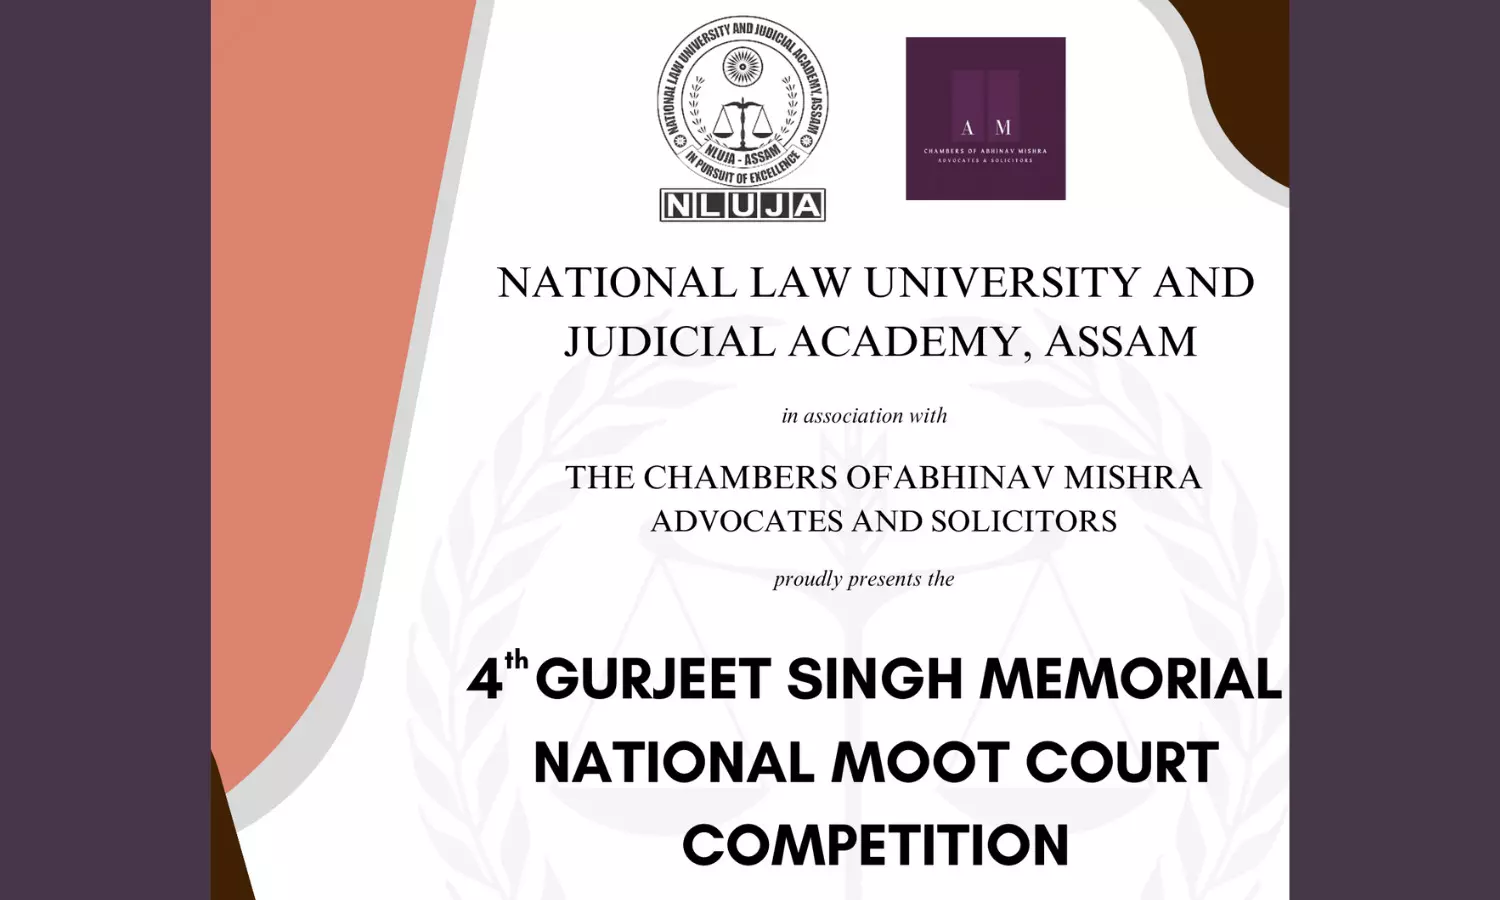 4th Gurjeet Singh Memorial National Moot Court Competition 2023 | National Law University and Judicial Academy, Assam | 26th - 28th May